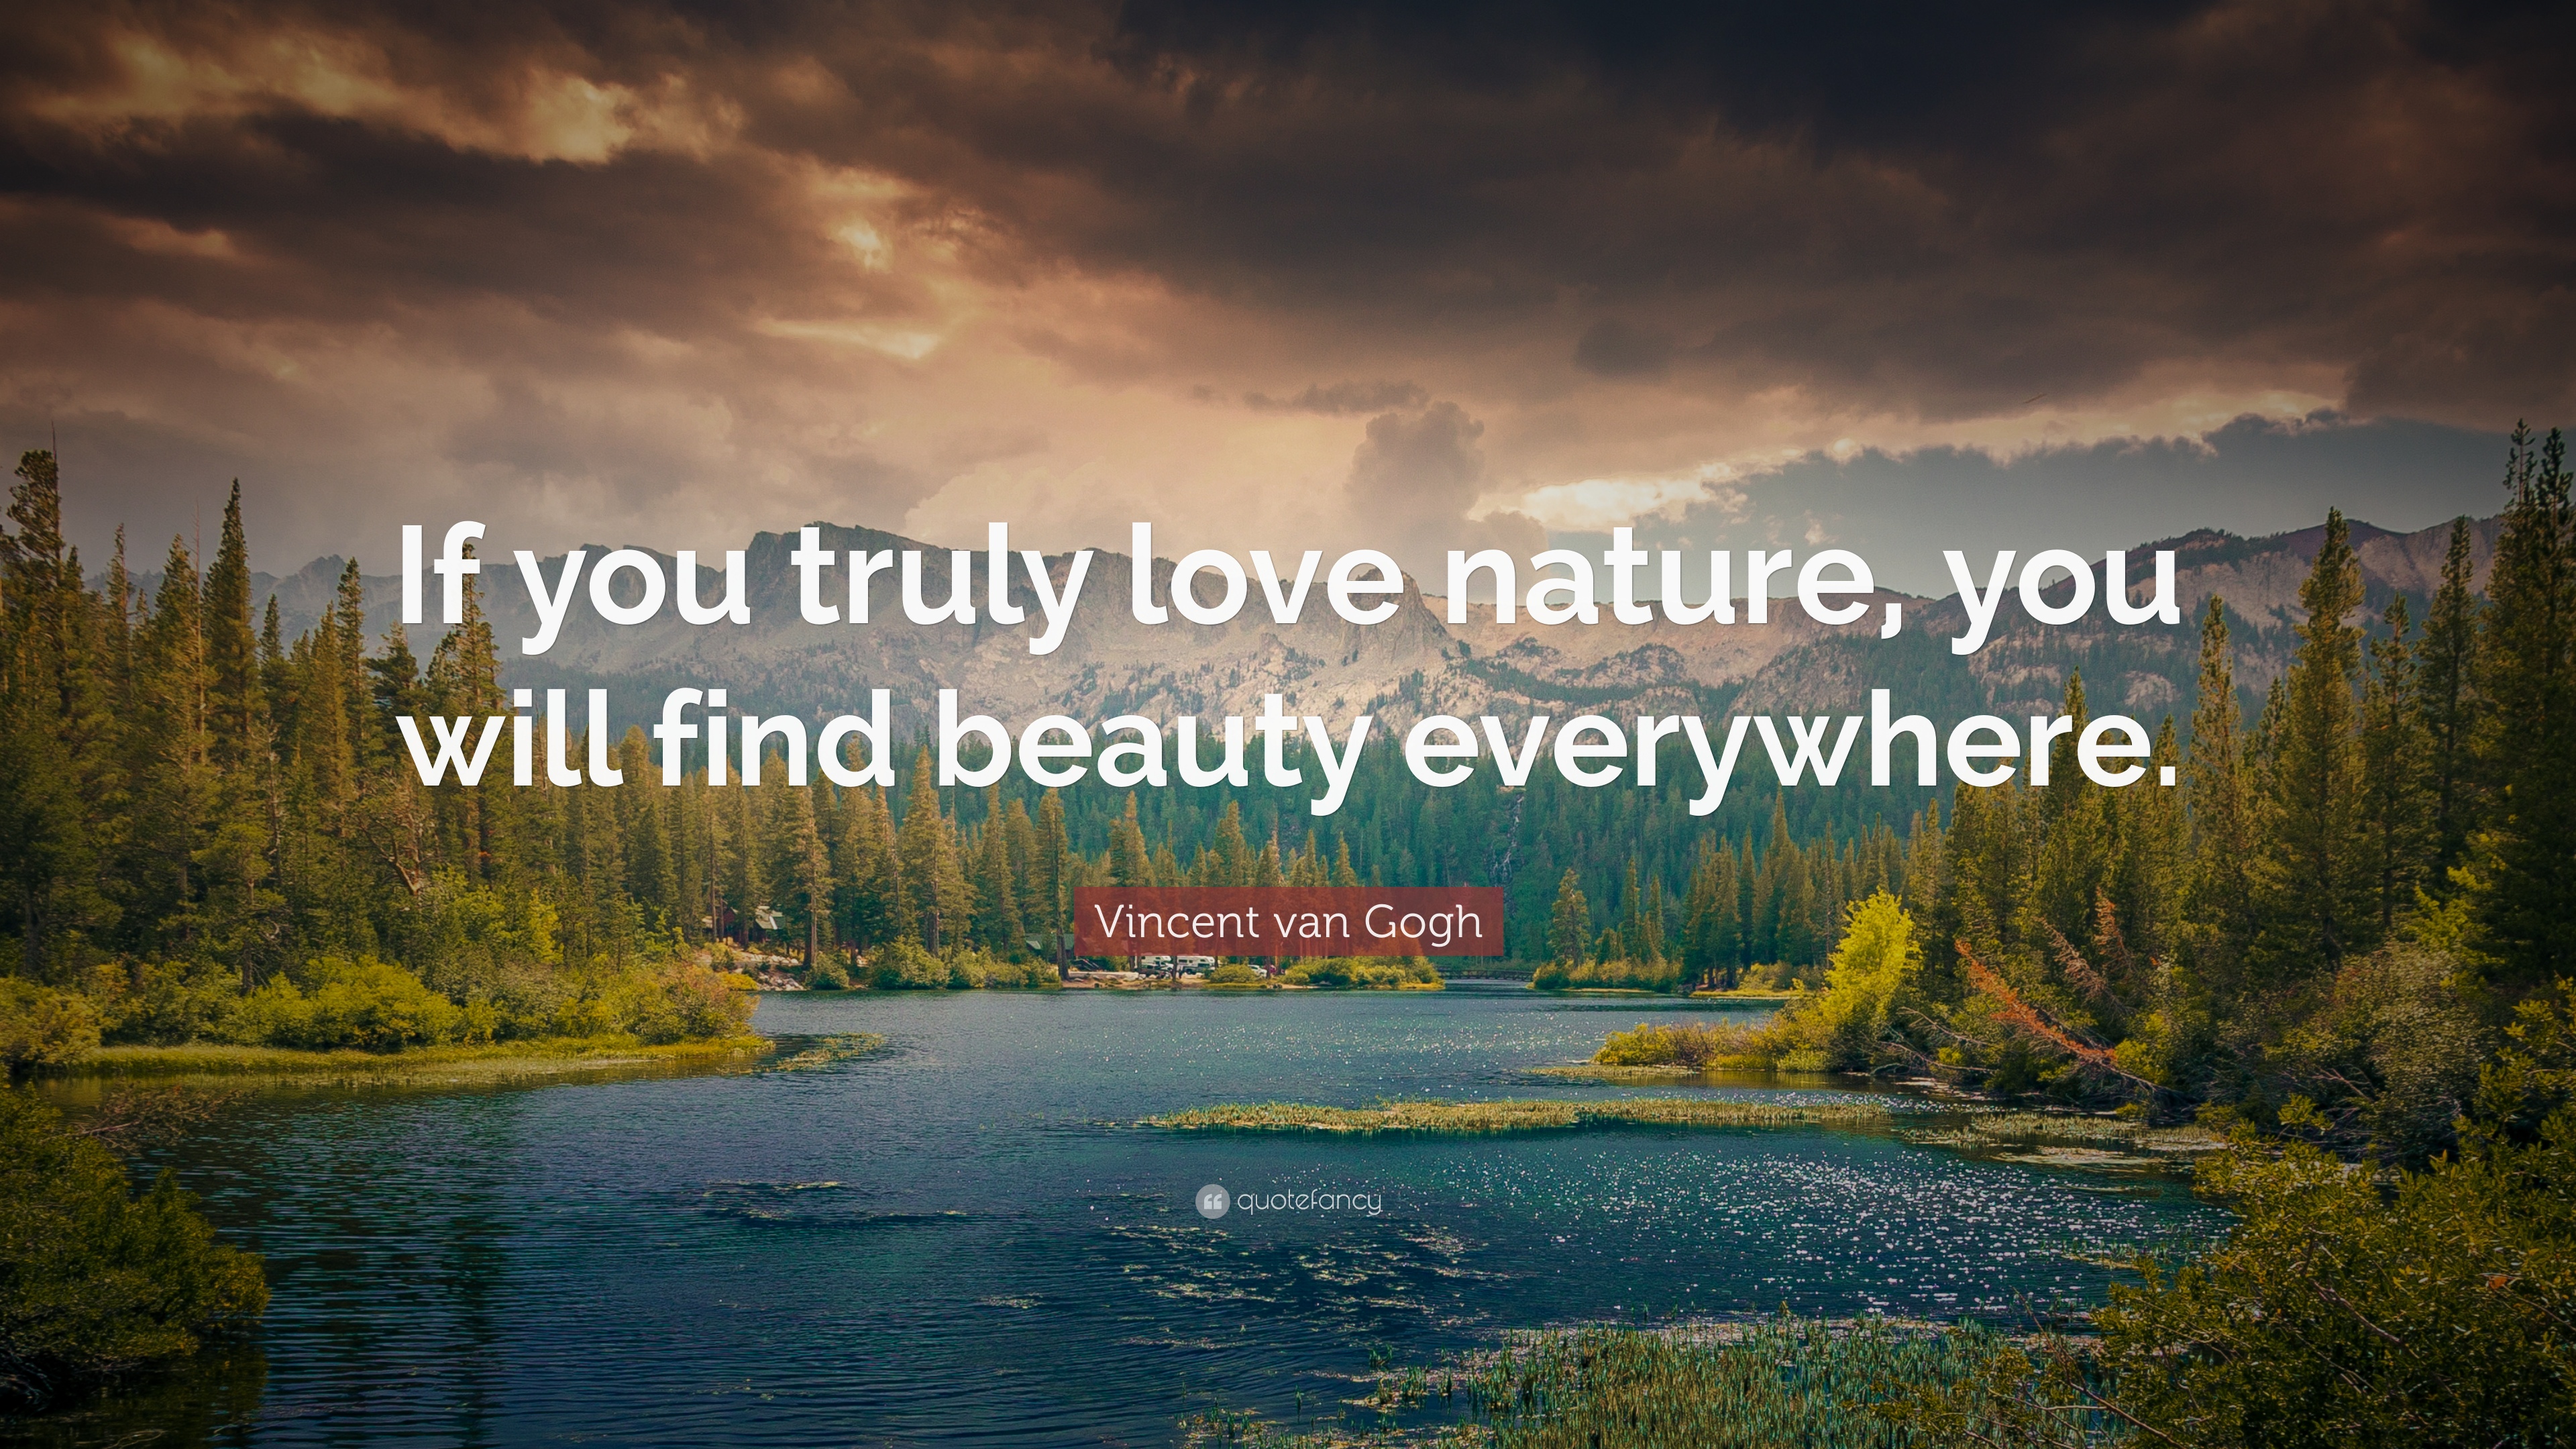 Vincent van Gogh Quote: “If you truly love nature, you will find ...